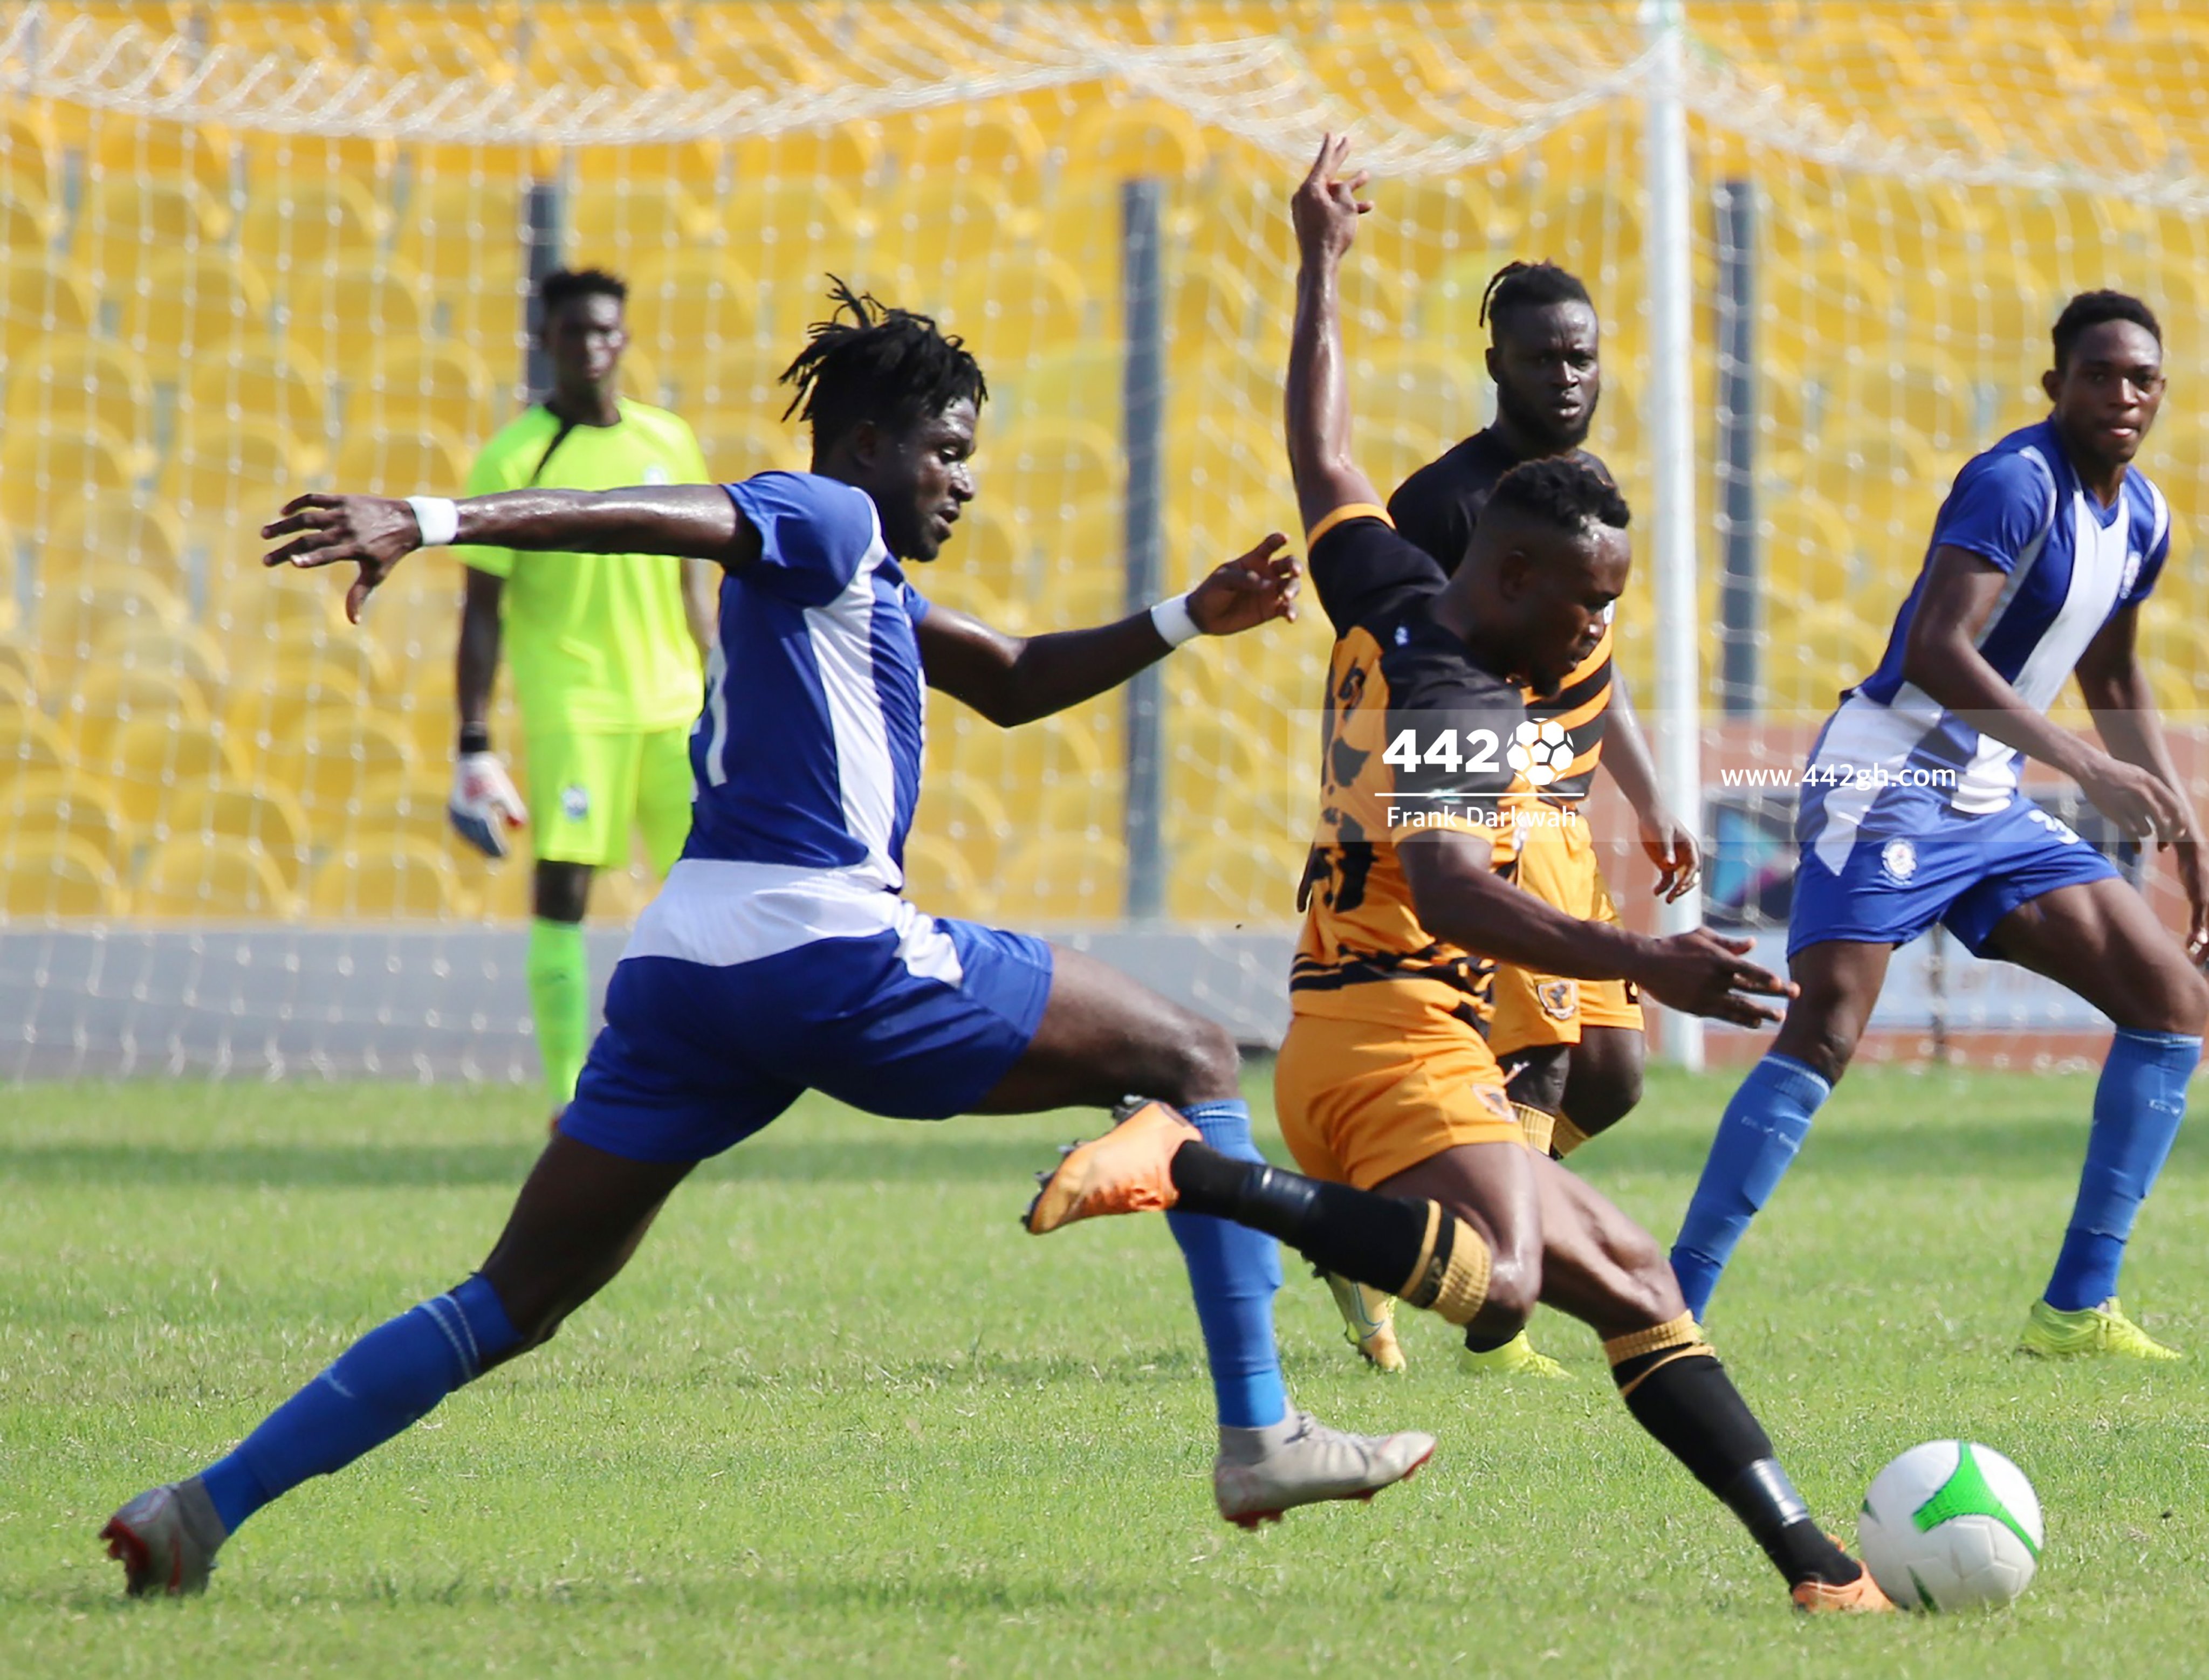 GPL: Results, league standings and goal scorers chat after match day 8